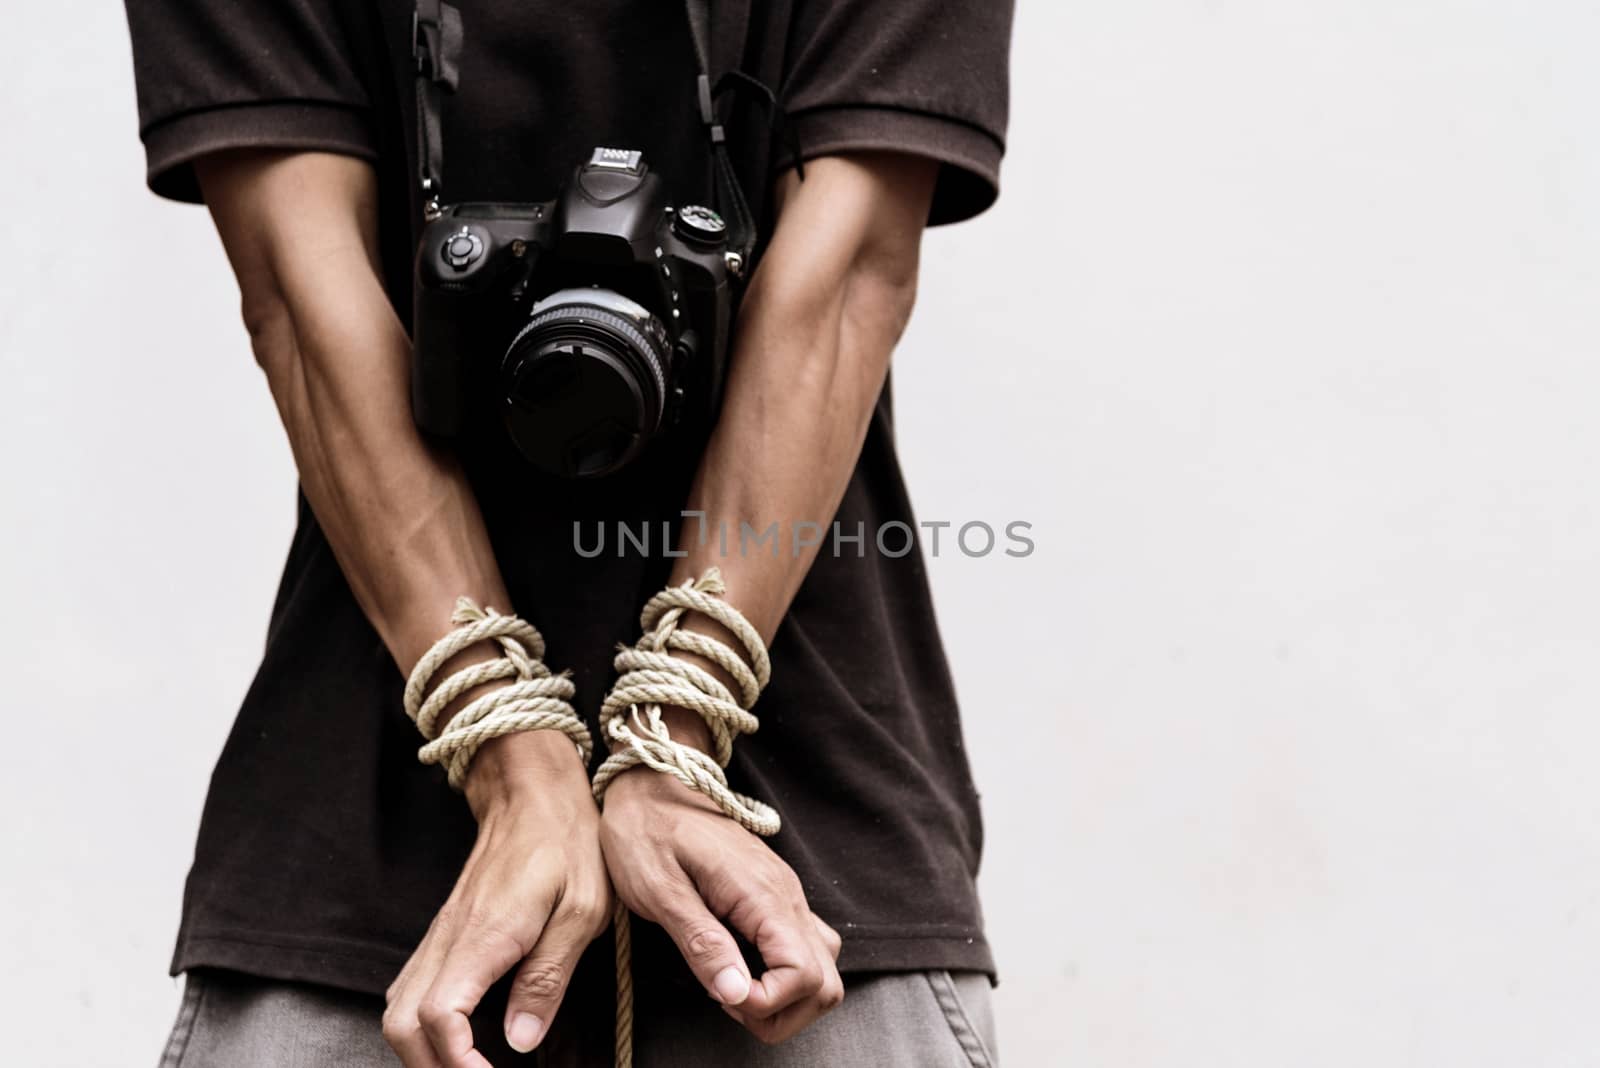 slave photographer / photographer has bundle by rope